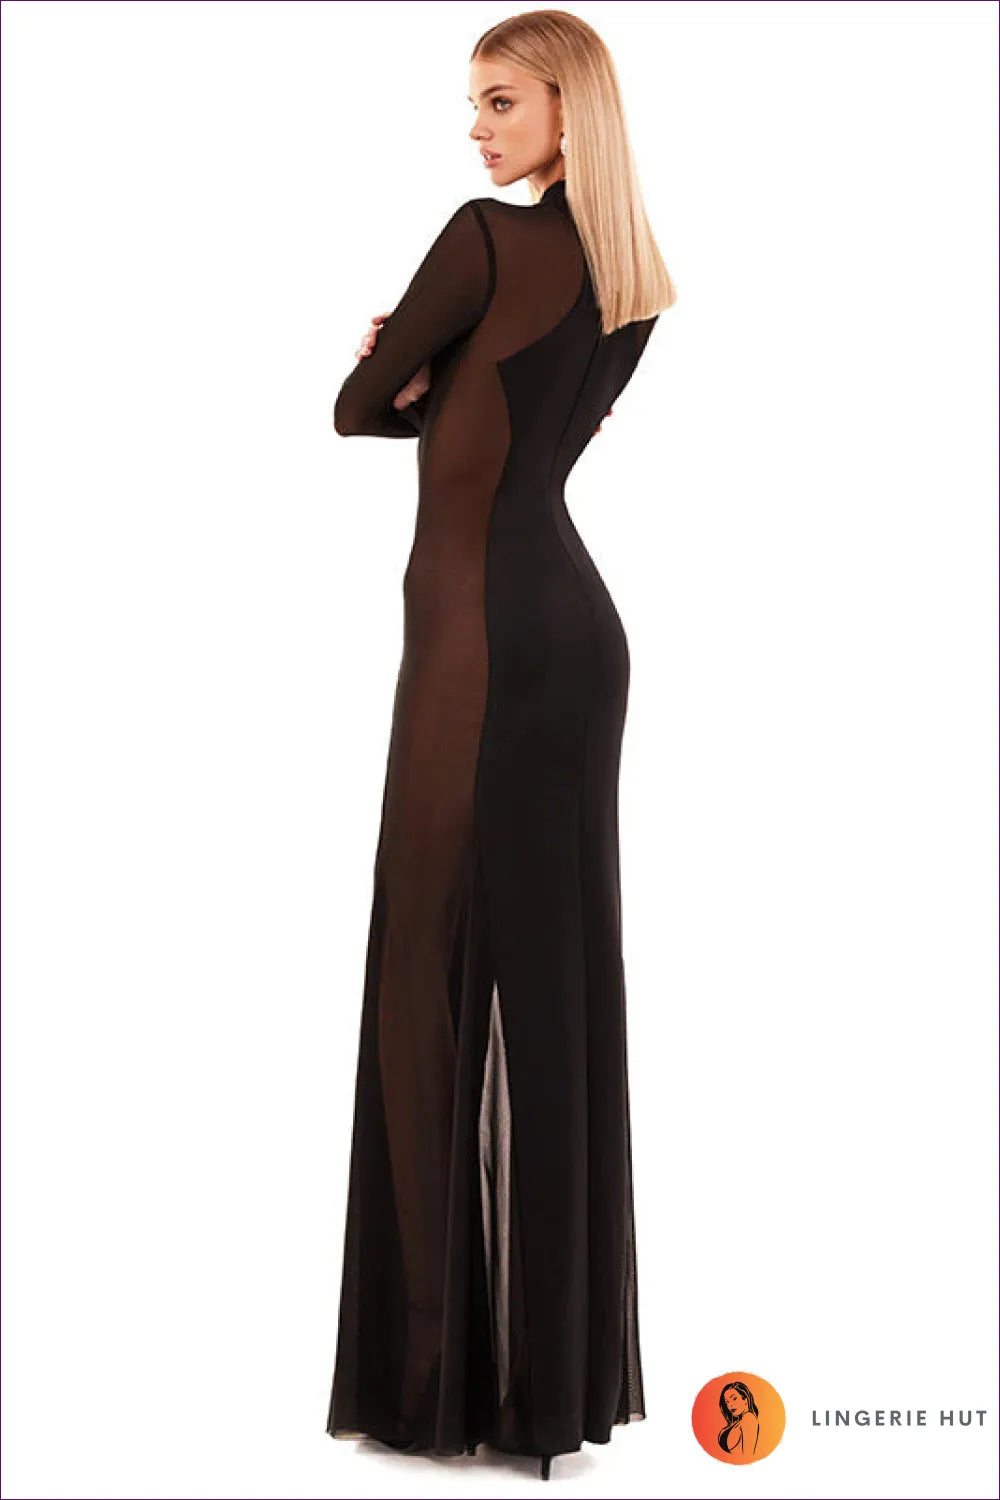 Unleash Your Inner Seductress With Our Sensuous Mesh Stitched Fishtail Dress. Captivate The Crowd Mesh